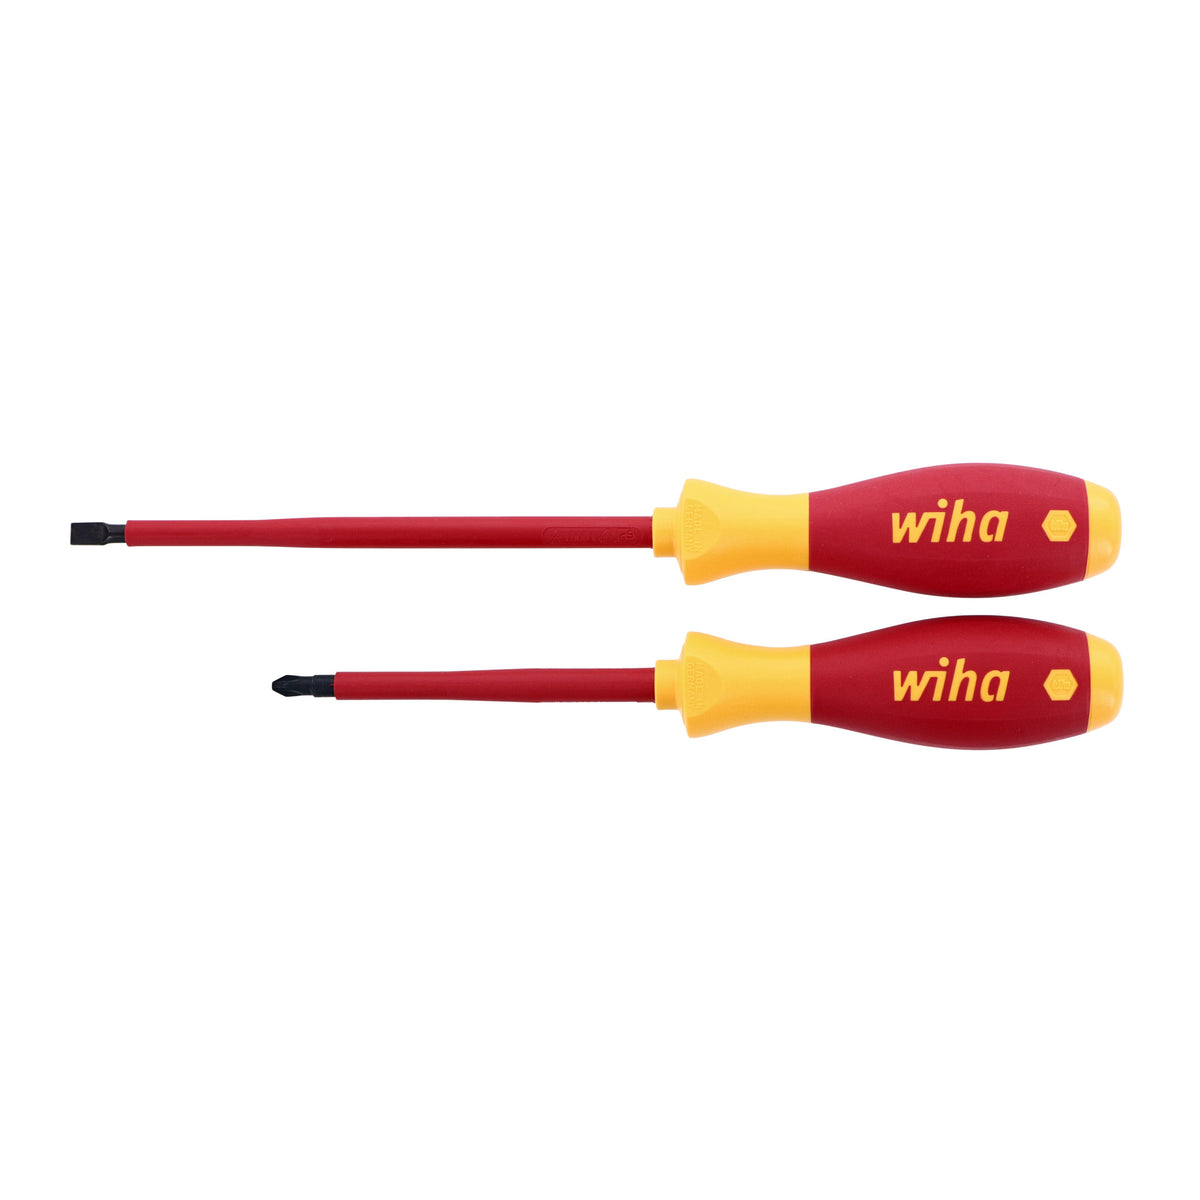 Wiha 33532 2 Piece Insulated Slotted and Phillips Screwdriver Set